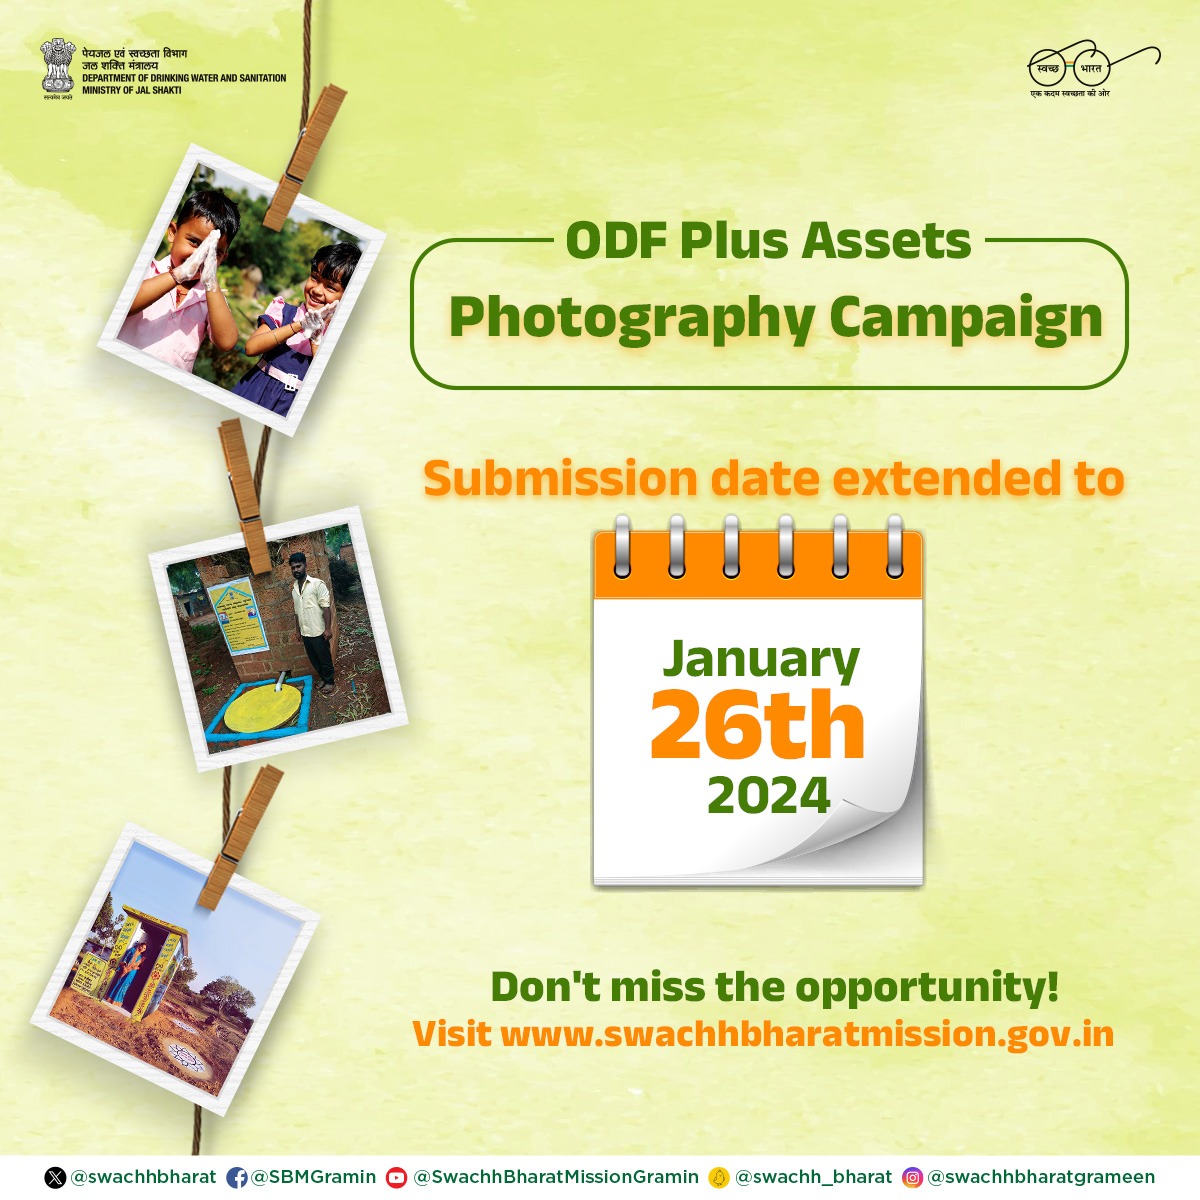 📷Last & Final extension for ODF Plus Photography Campaign 📷

Upload your entries on 👉🏻innovateindia.mygov.in/odf-photograph…
by 26th January, 2024. 

#SBMG #ODFPlus